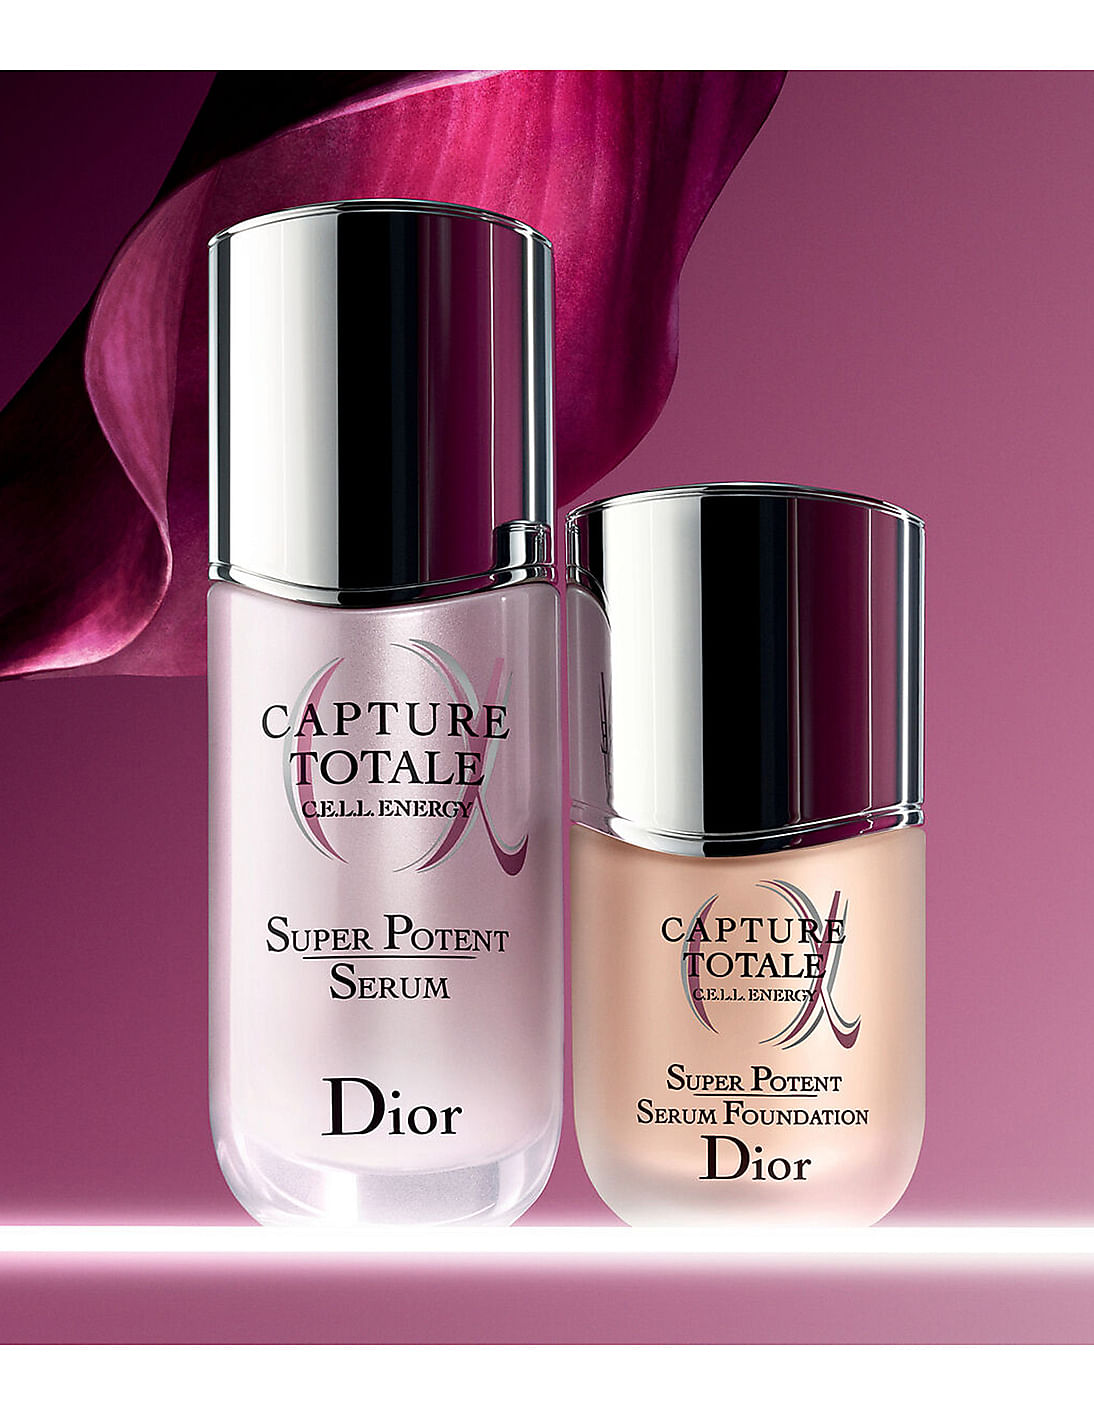 SALE  Dior Capture Totale Super Potent Serum Beauty  Personal Care  Face Face Care on Carousell